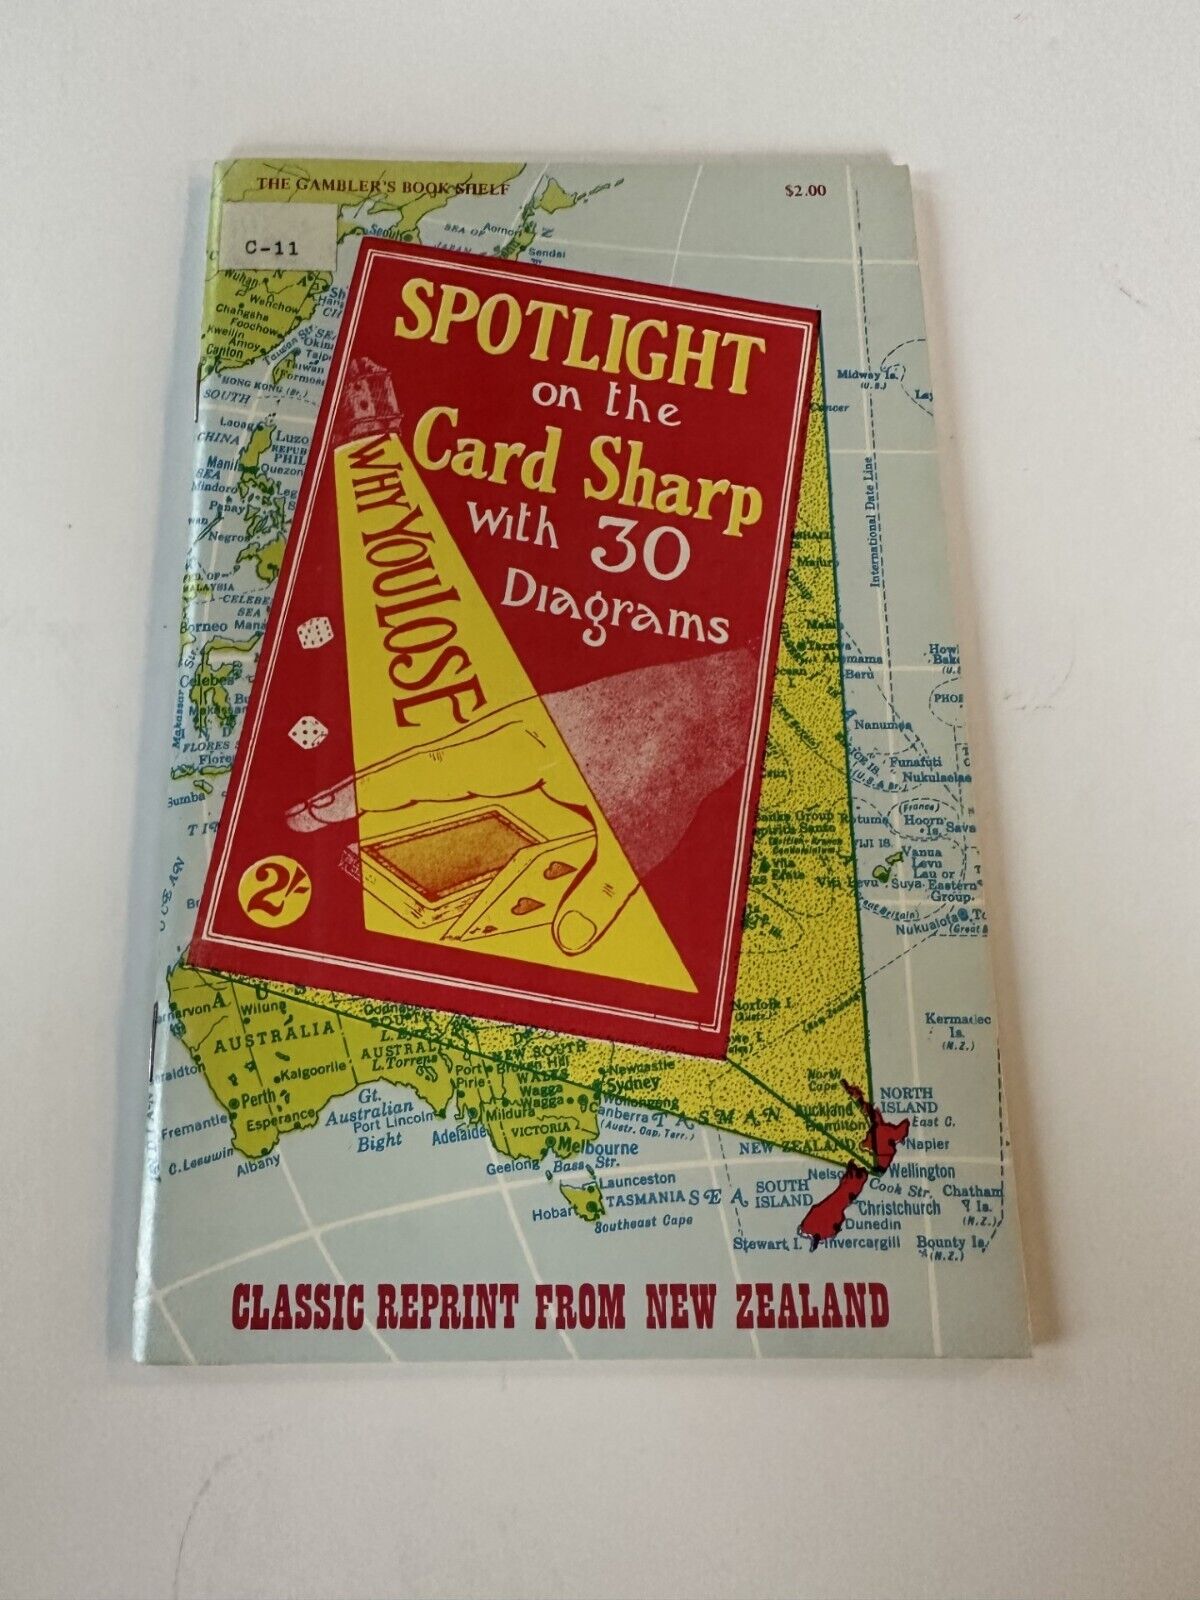 Spotlight on the Card Sharp by Lawrence Scaife - RARE Worth over $100